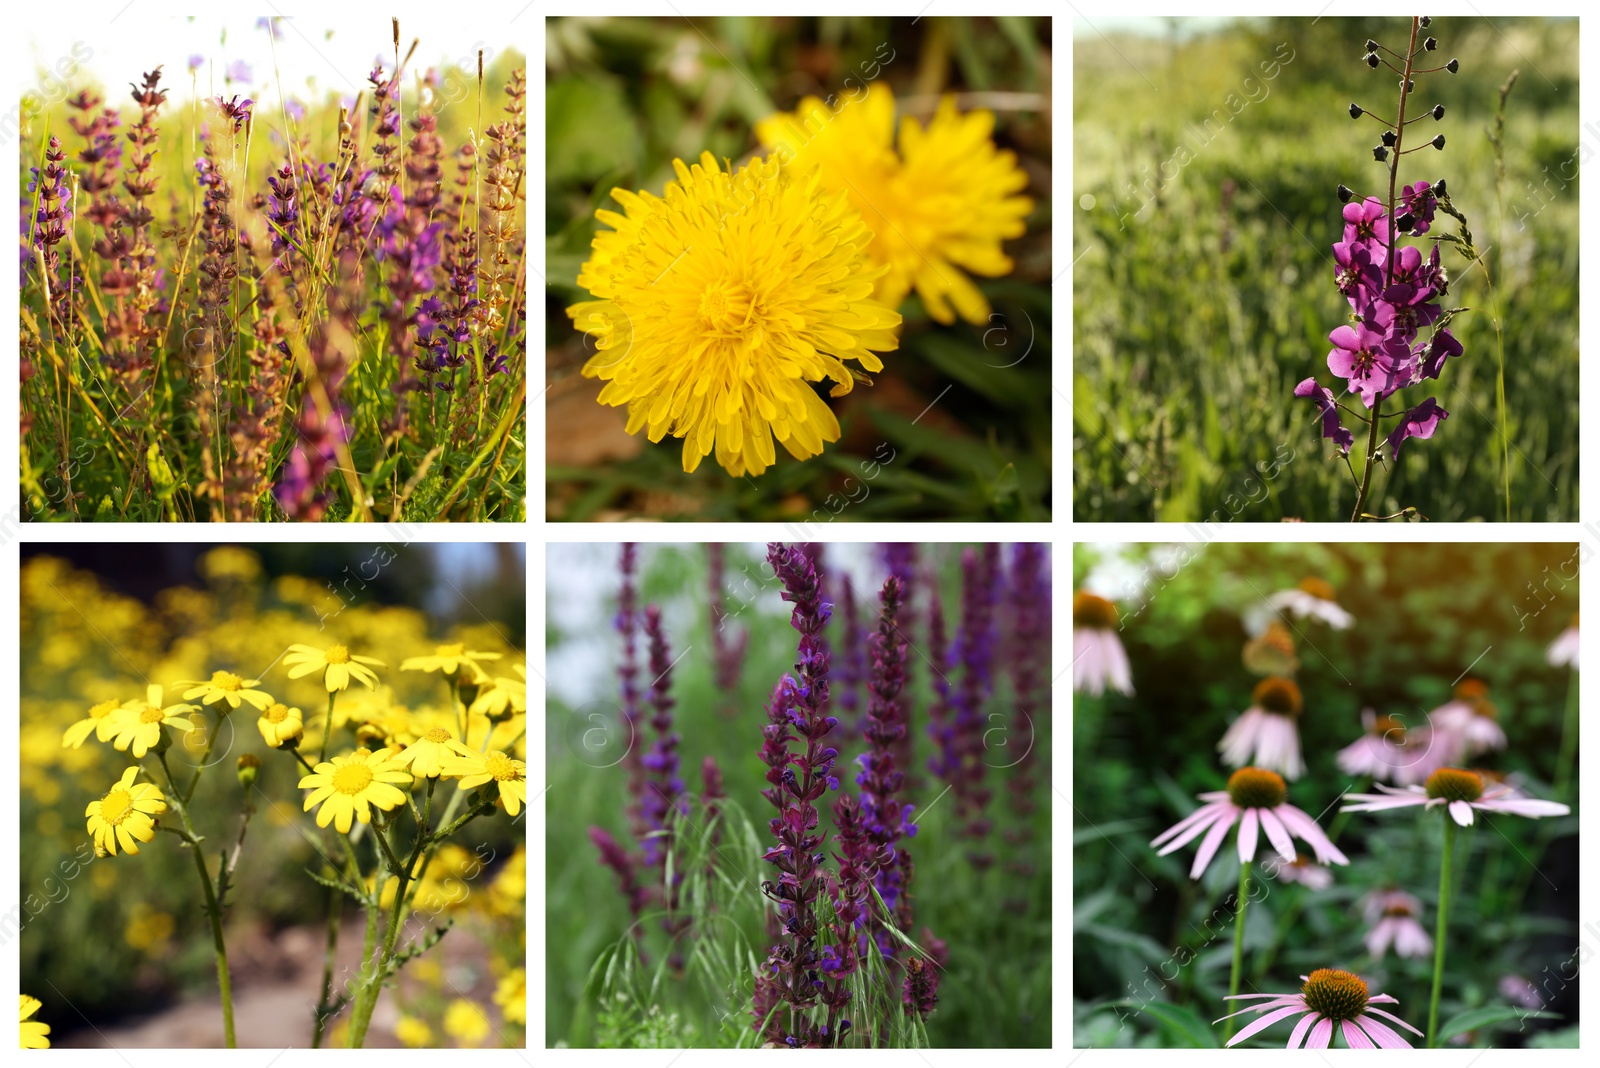 Image of Collage with photos of different beautiful wild flowers growing in meadow